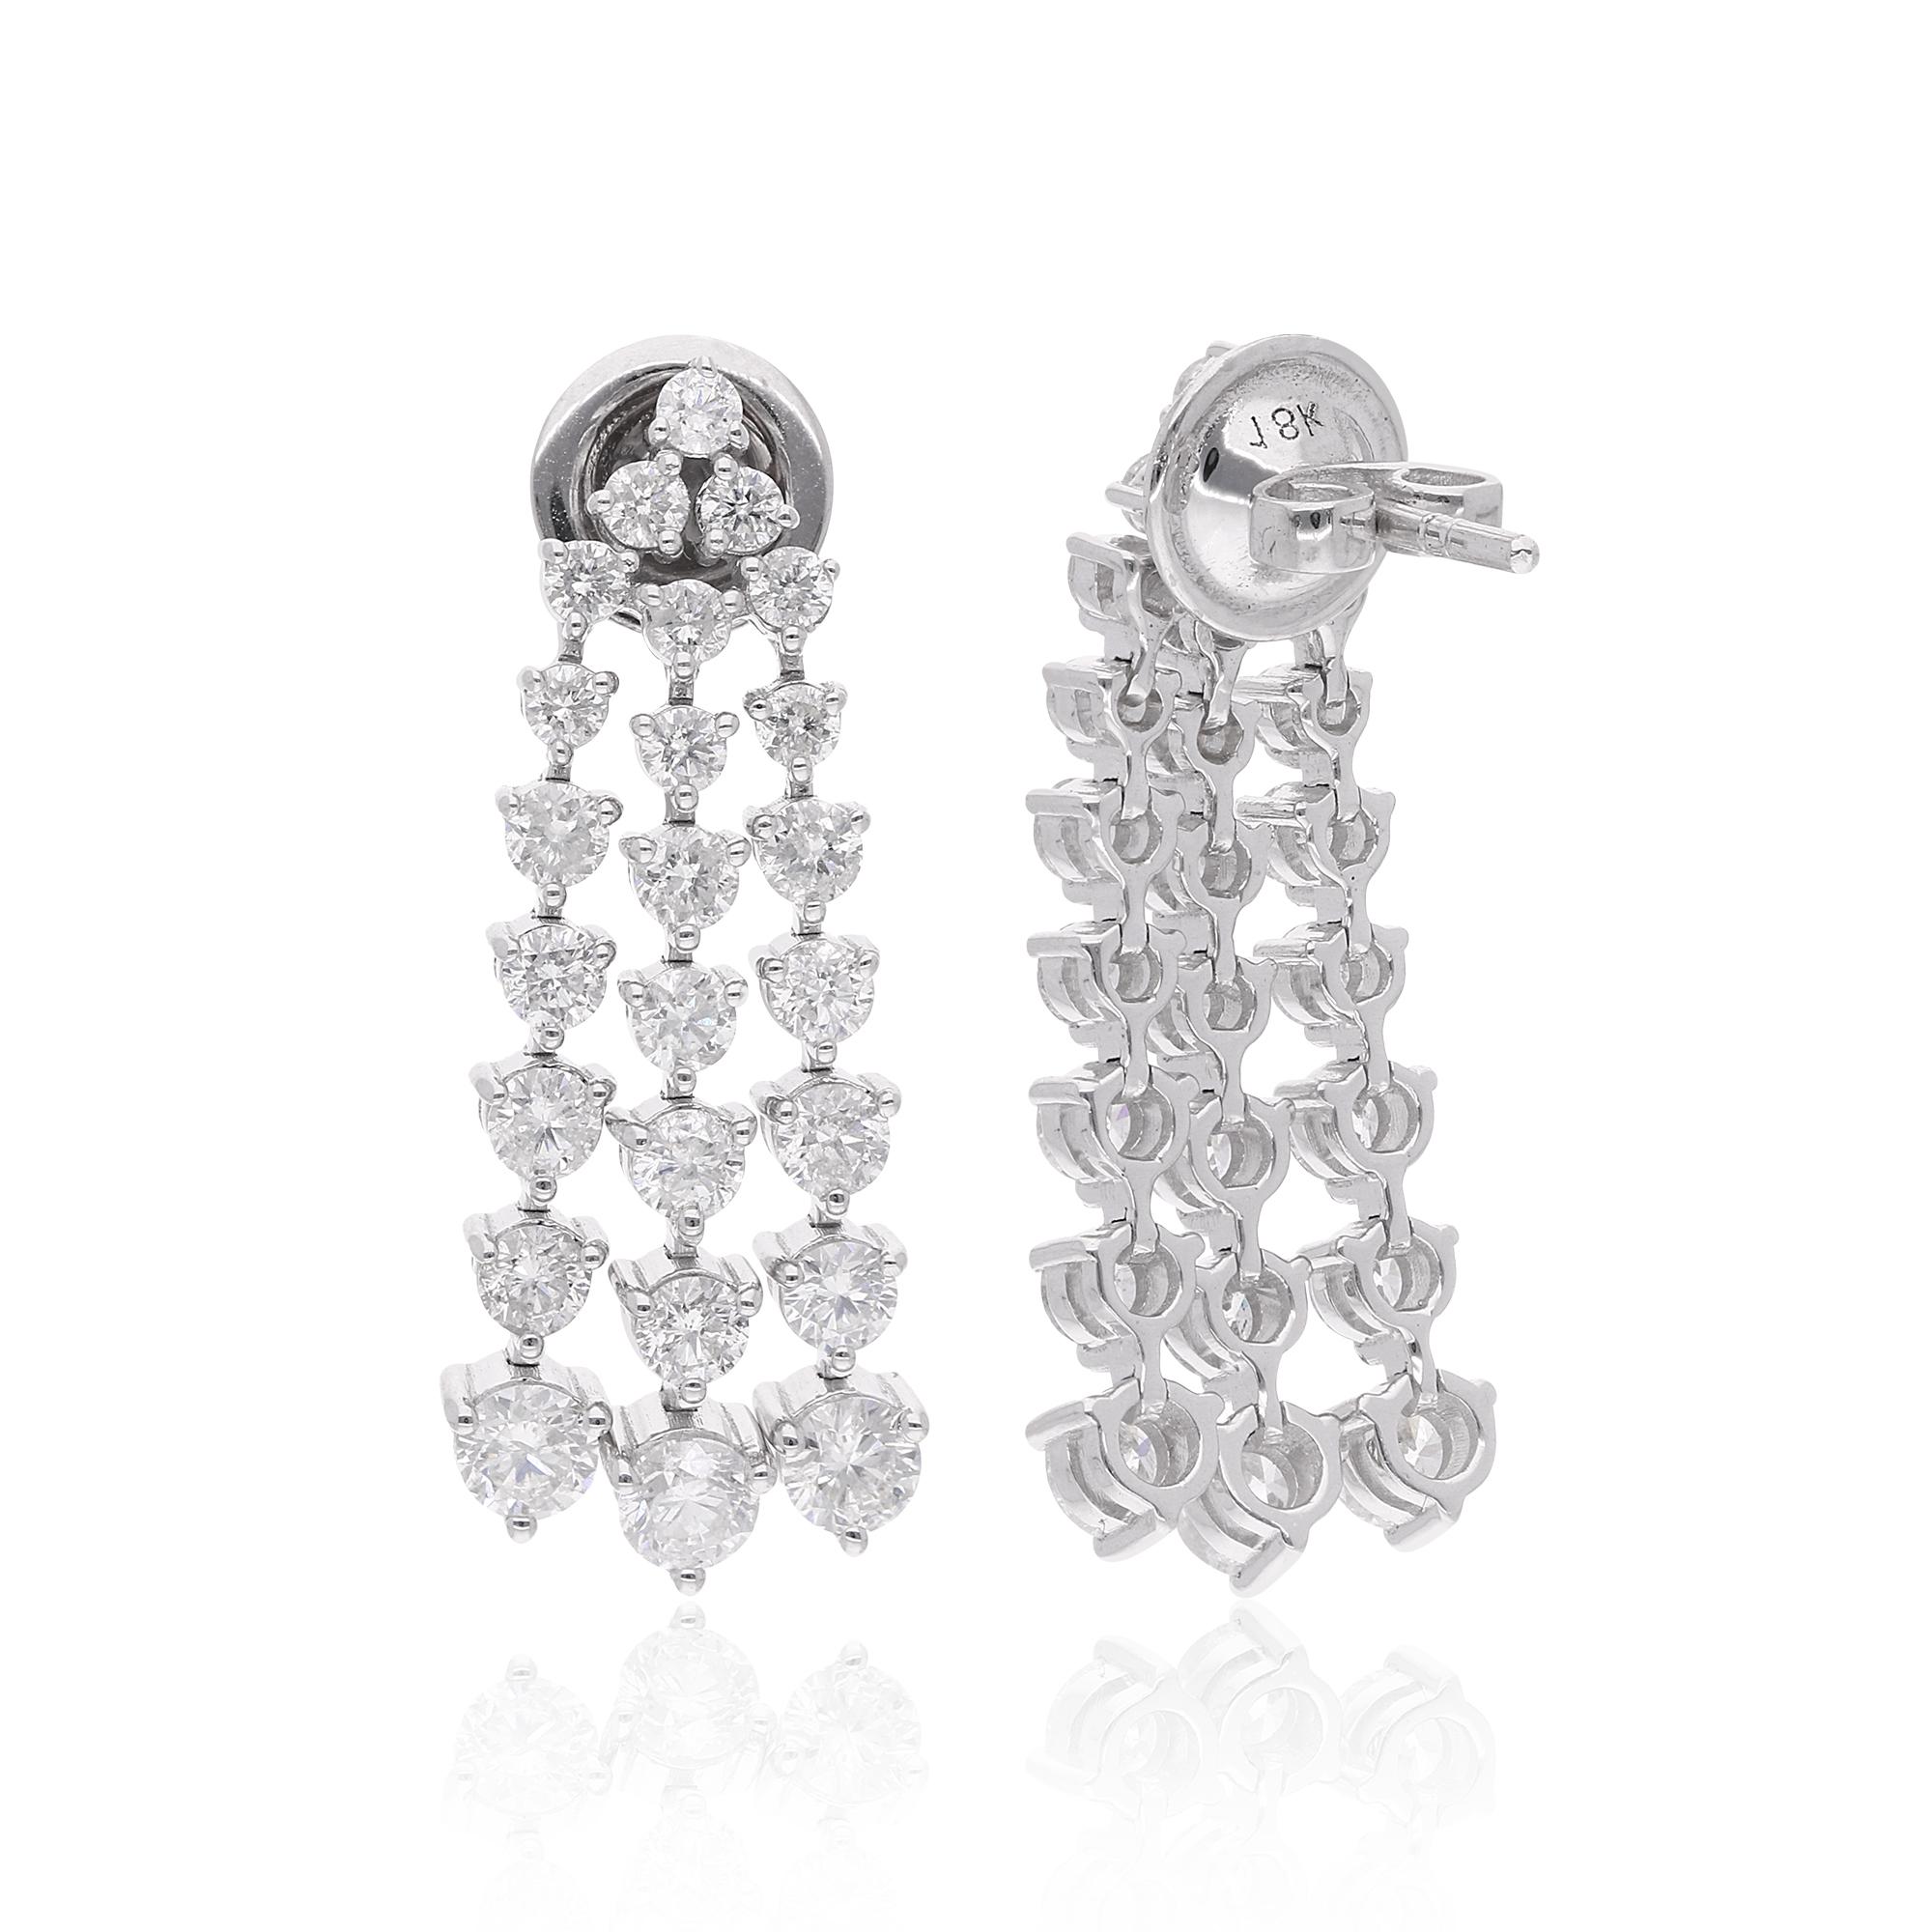 Make your look hypnotic and charming with this classy Earrings studded with Diamond featuring fascinating alluring 14k White Gold finish. Stylish floral design make it flamboyant and elegant that you can wear it on parties or on a special